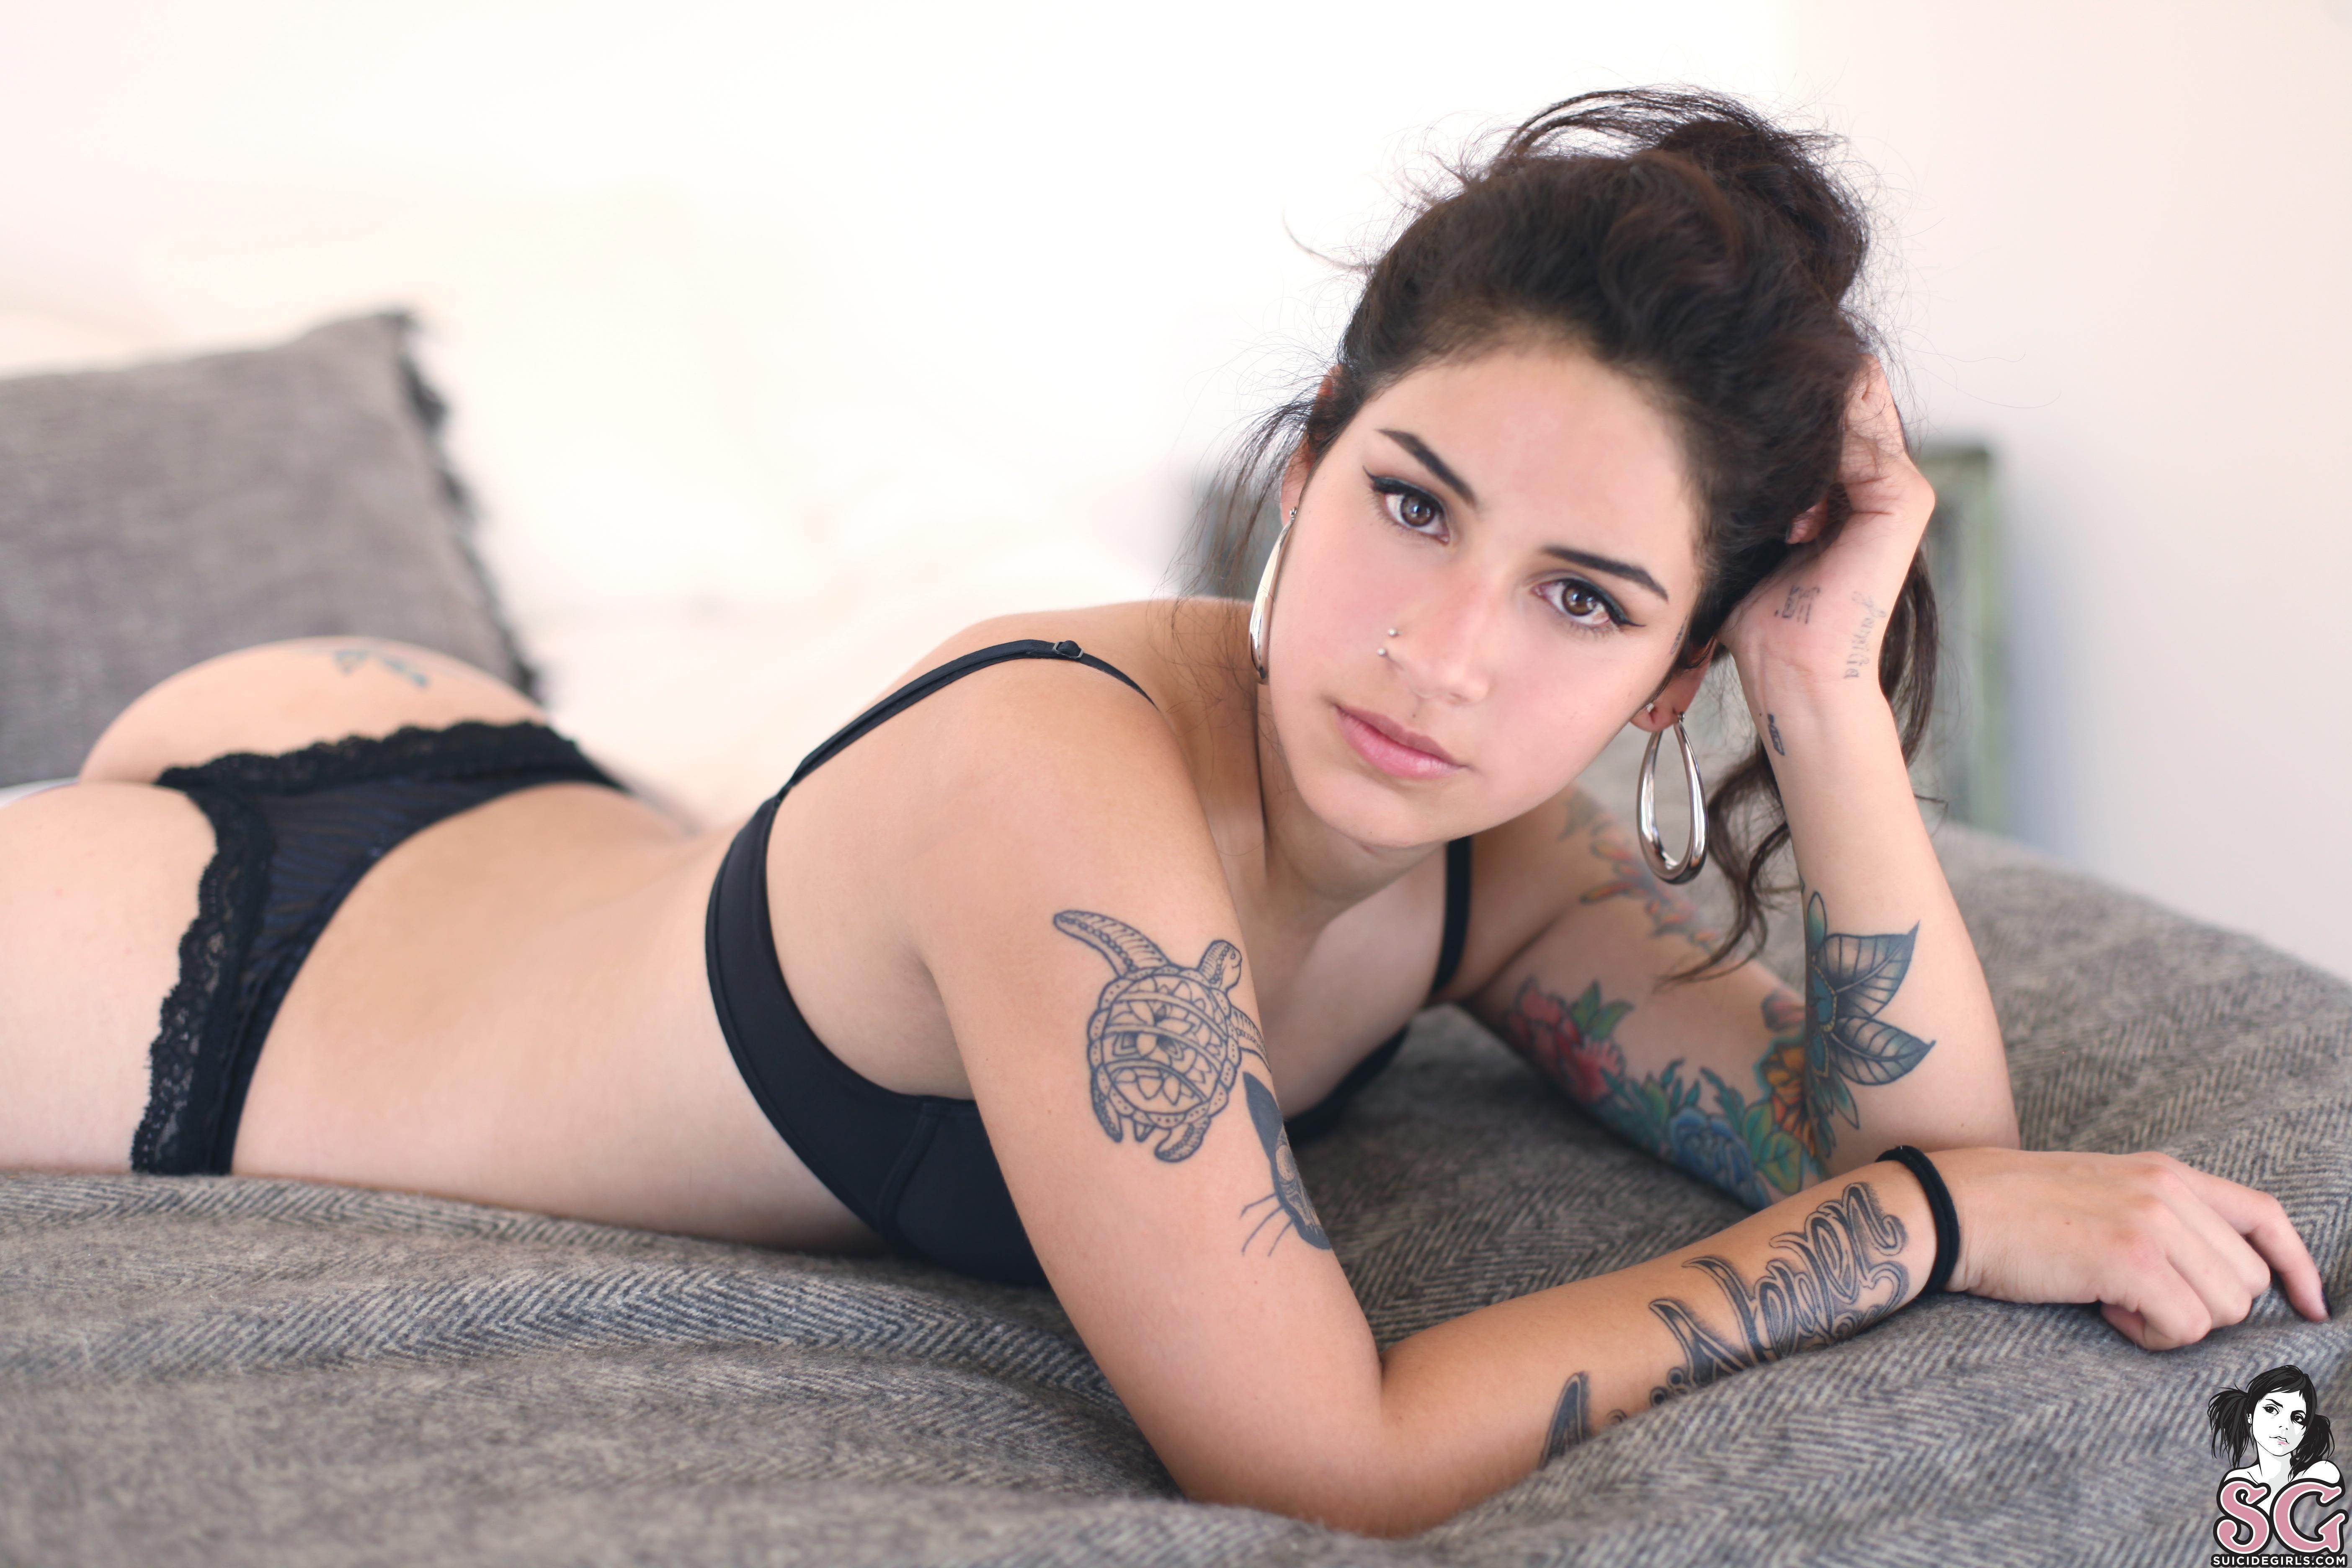 Free photo Girl in black underwear and body tattoos